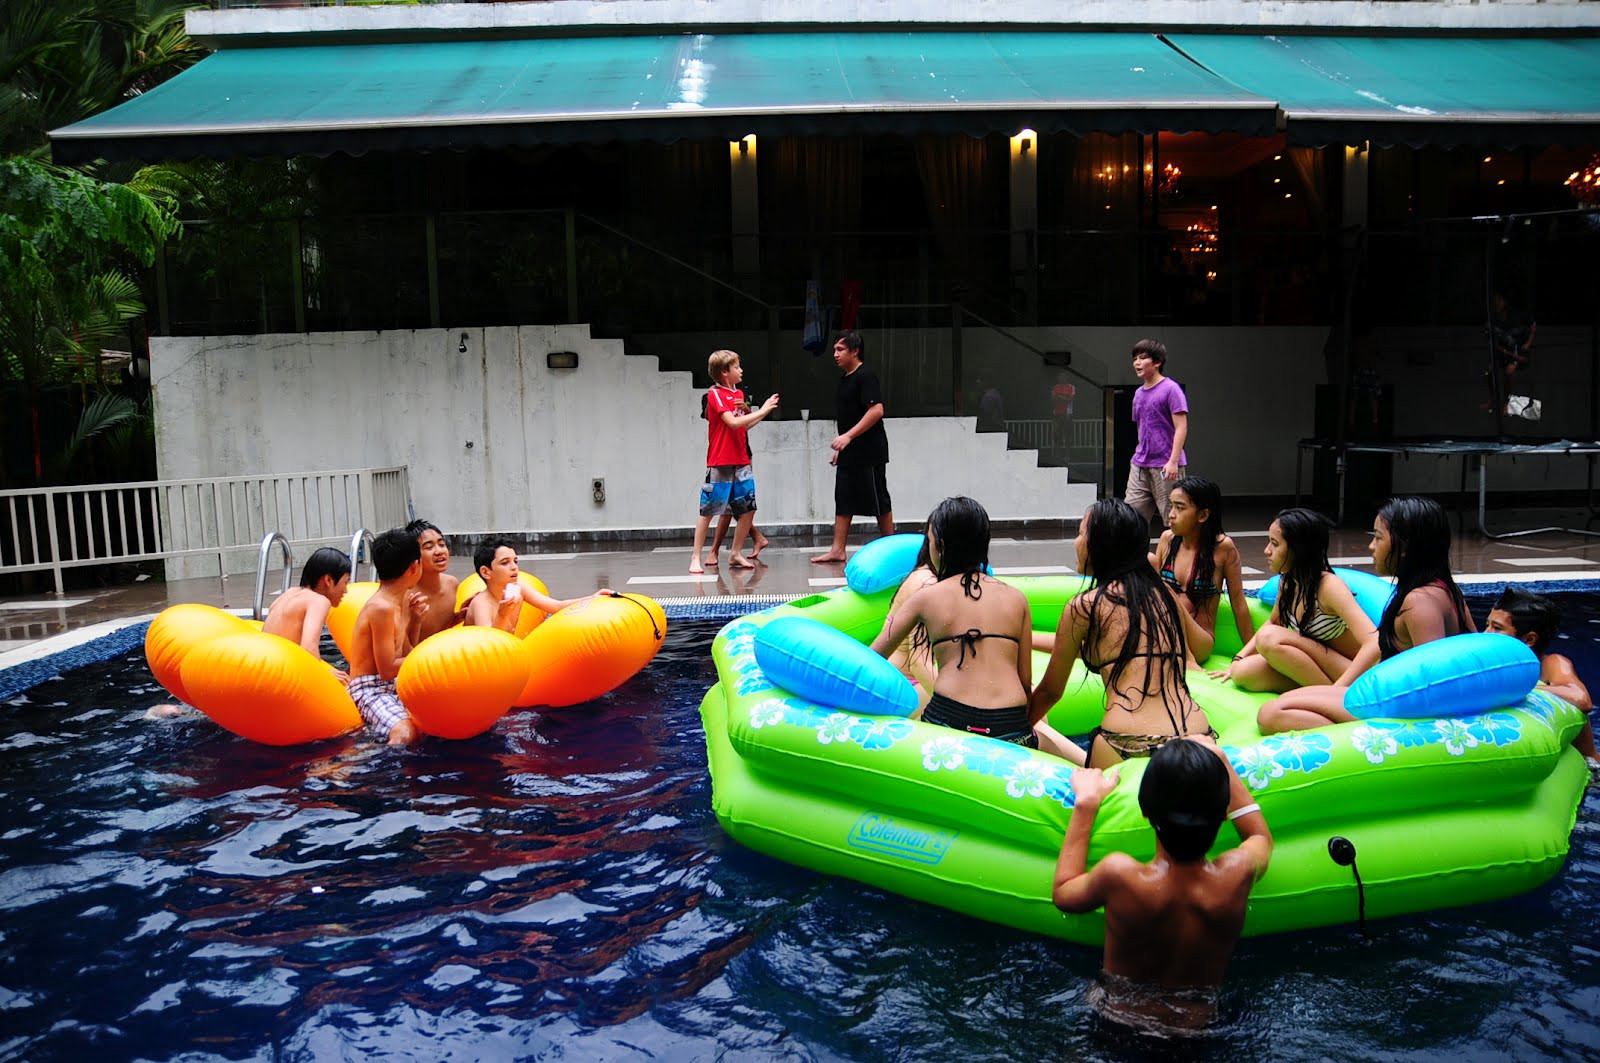 Cool Pool Party Ideas For Adults
 Event DirecTus Pool Party FUN for KIDS TEENS & ADULTS